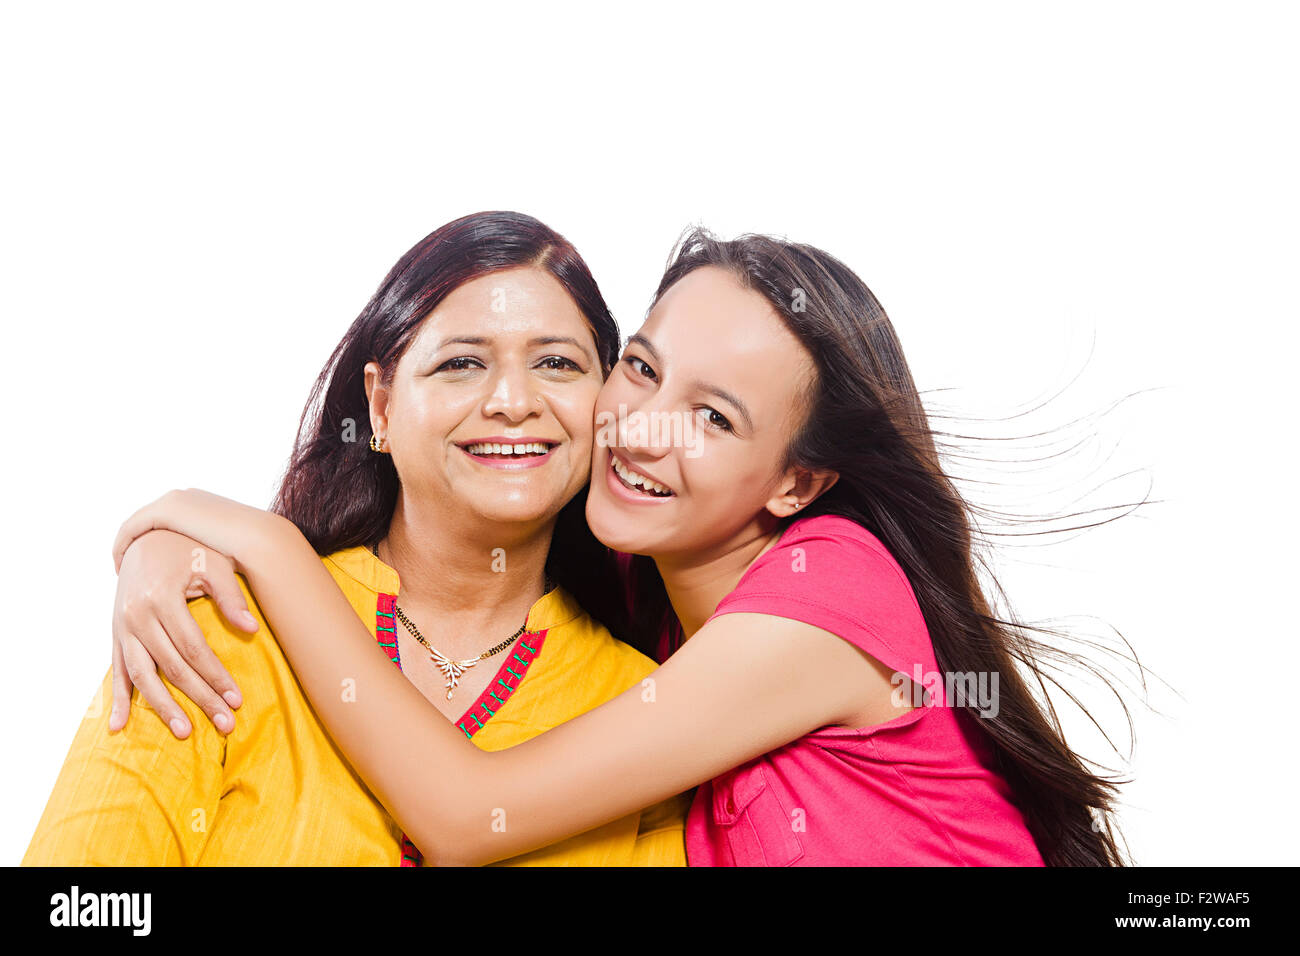 Indian Mom And Little Son Porn - Indian Mother Daughter Stock Photos & Indian Mother Daughter ...